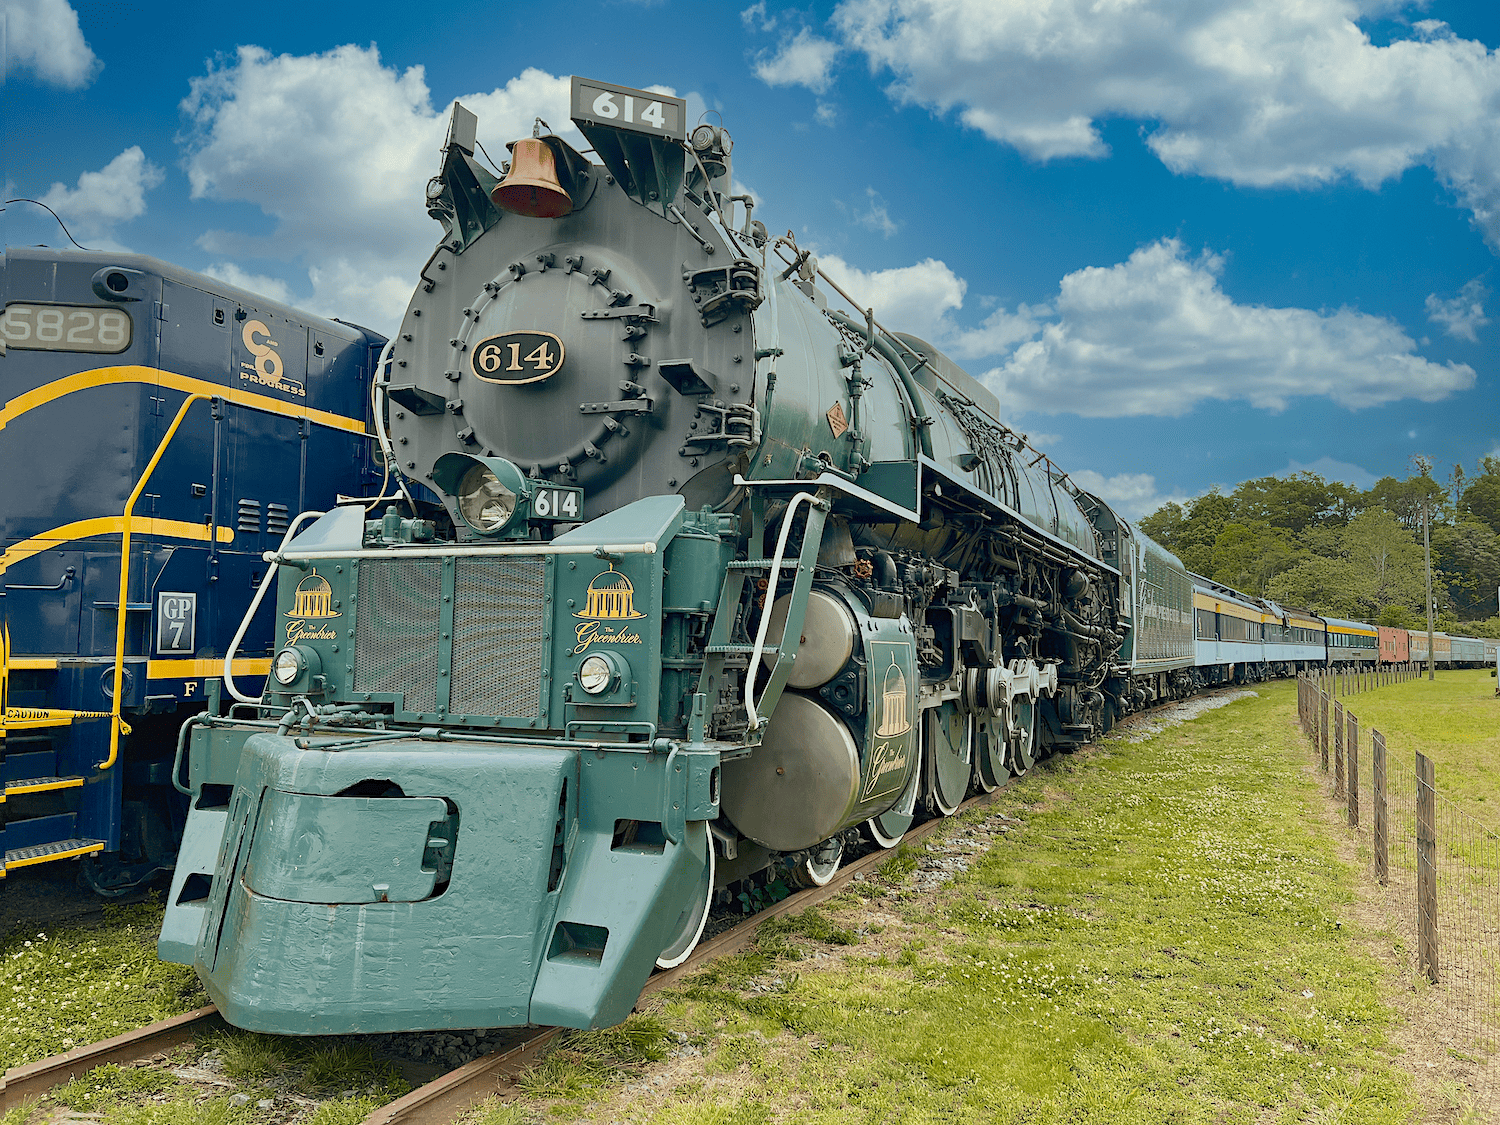 c-o-steam-locomotive-greenbrier-no-614-75-year-legacy-and-history-of